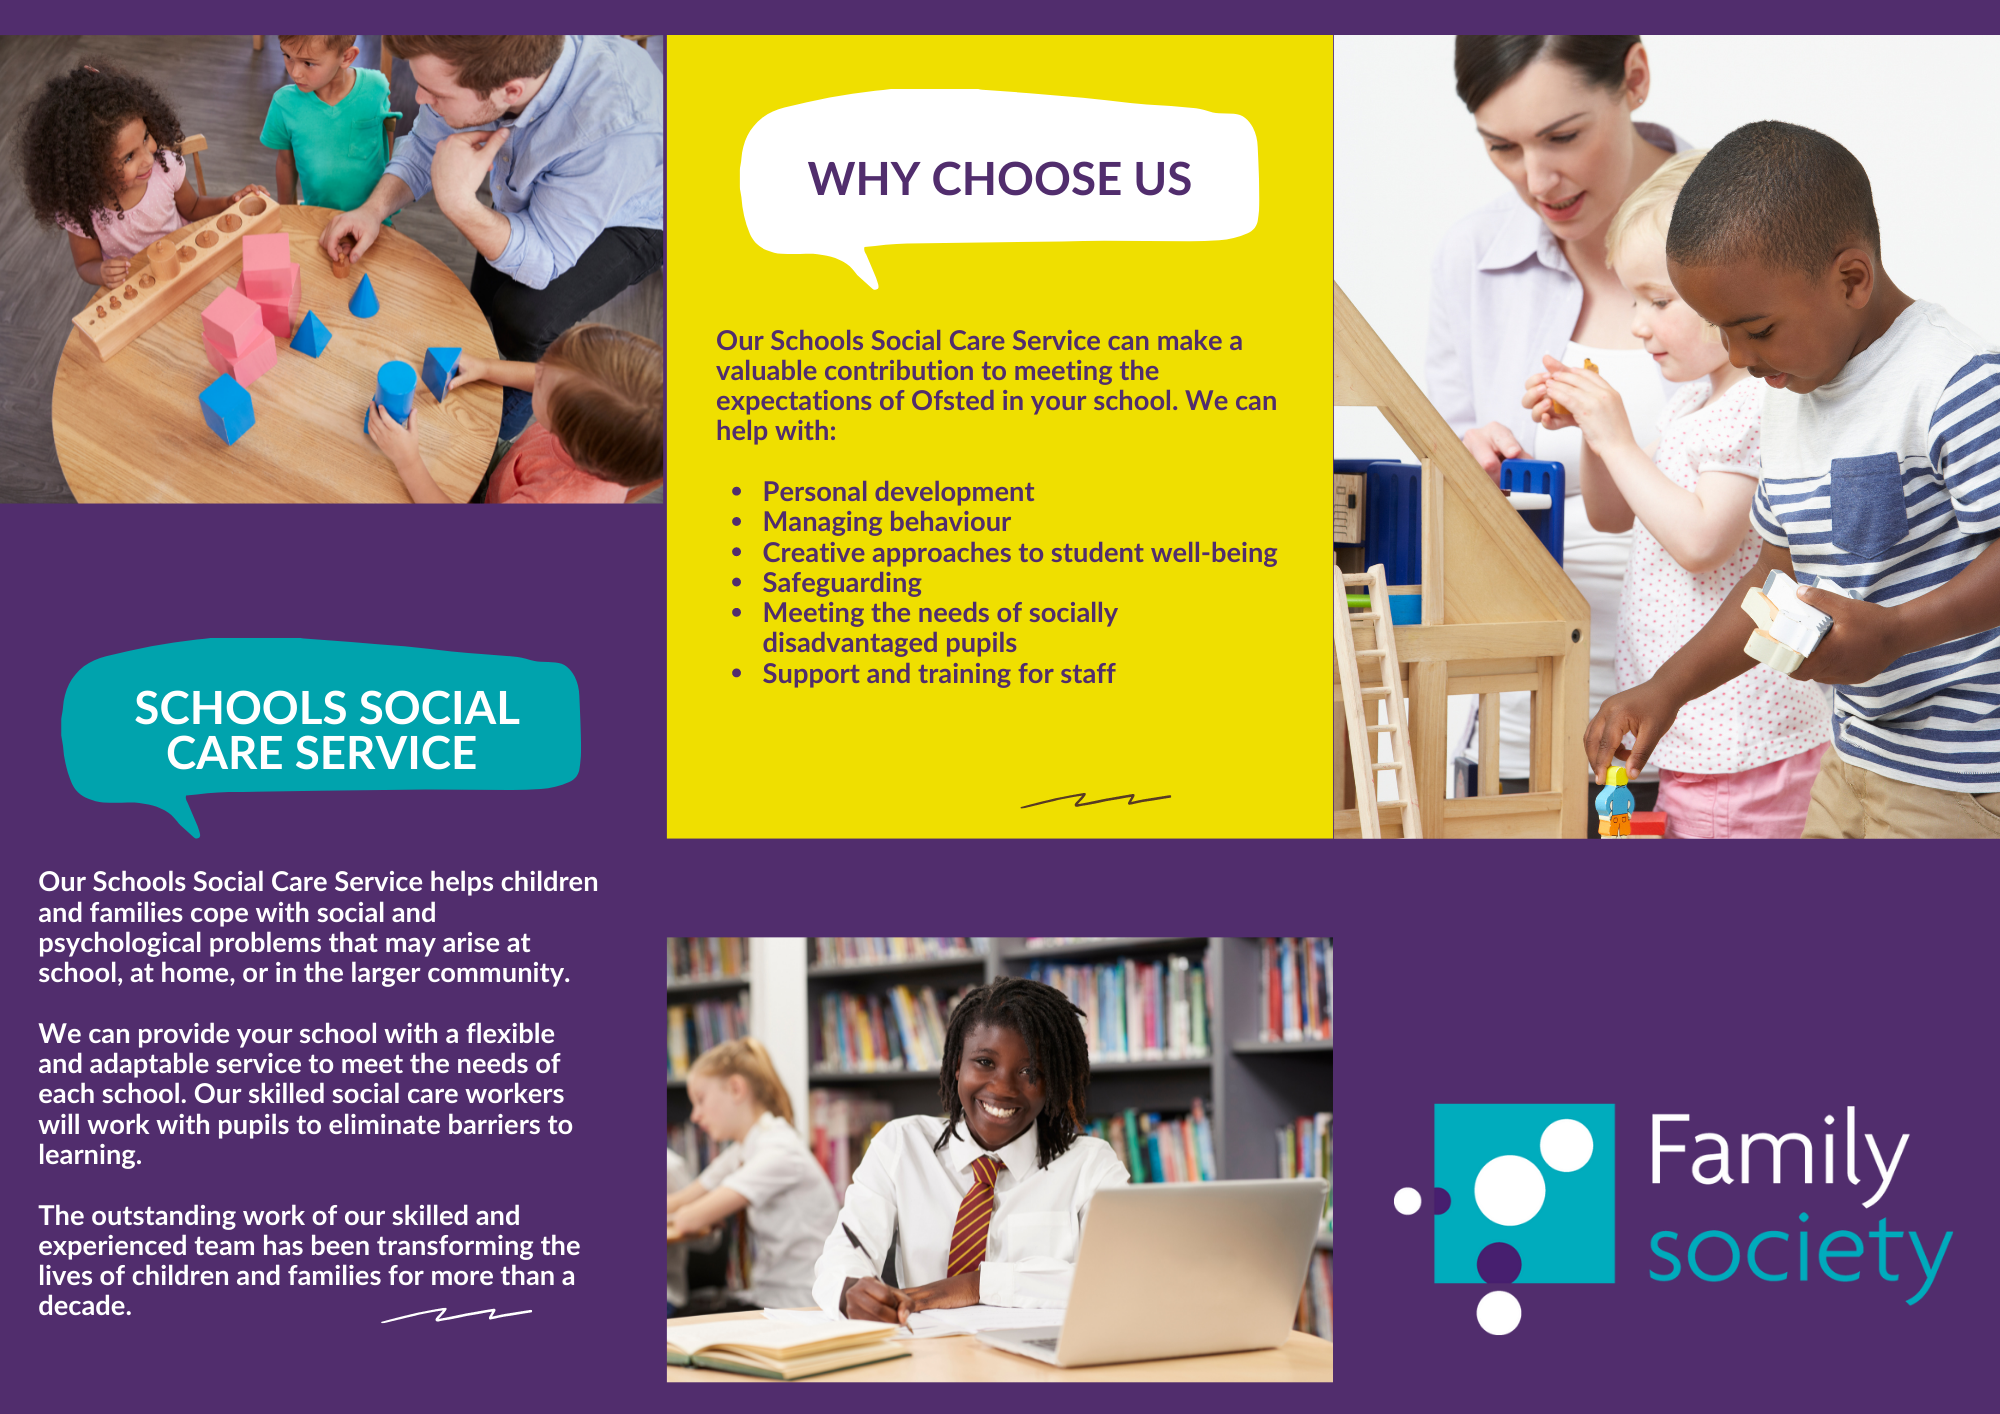 All you need to know about our school's social care service.